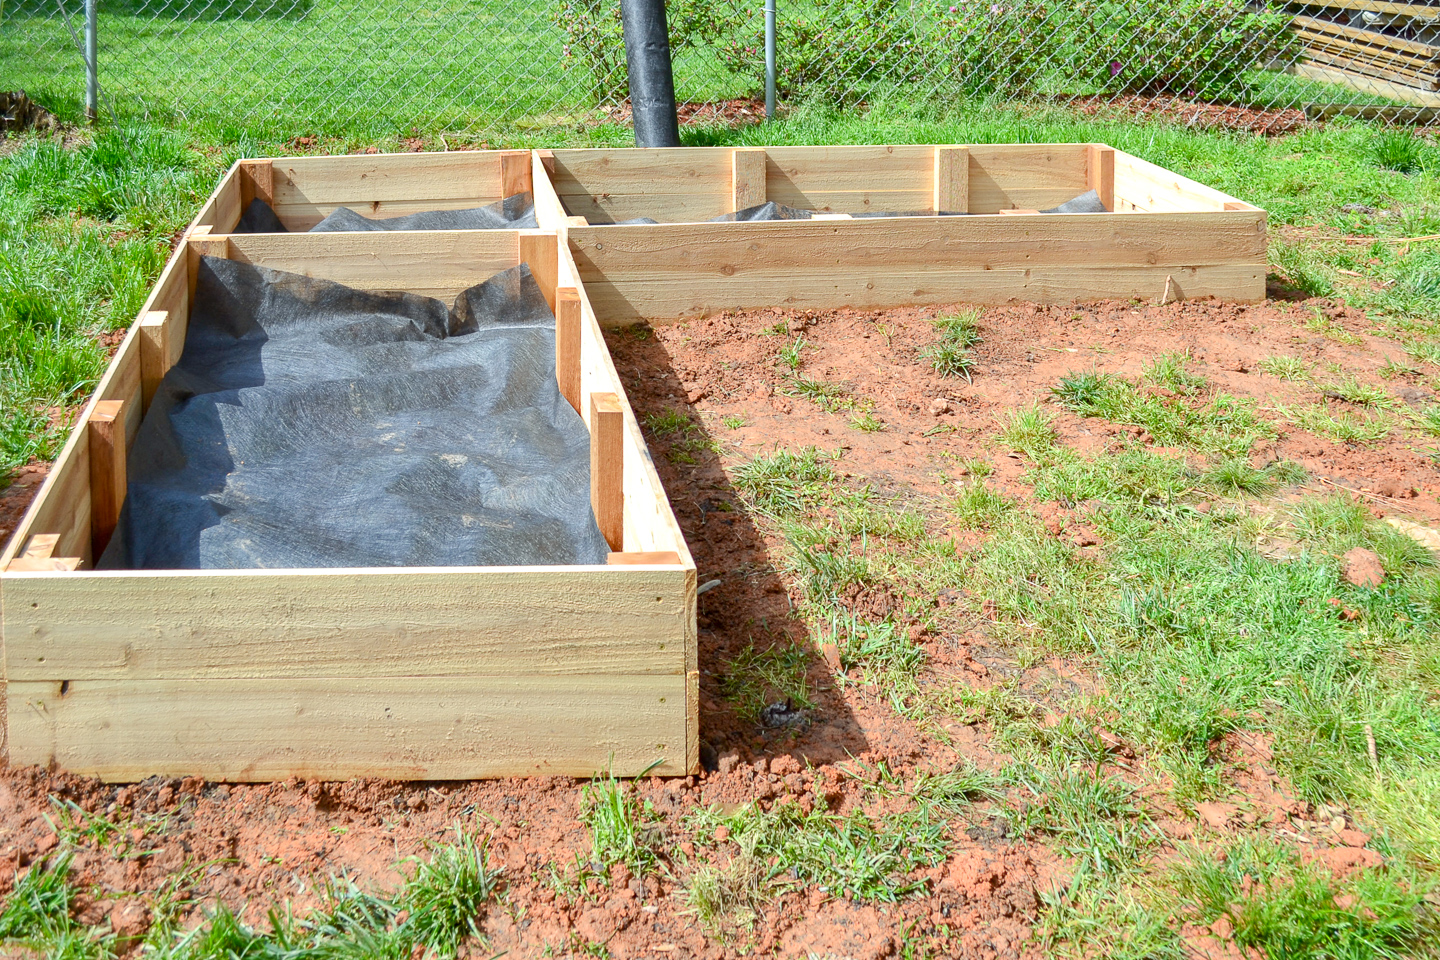 finished cedar raised garden beds - laying down landscaping fabric weedblocker